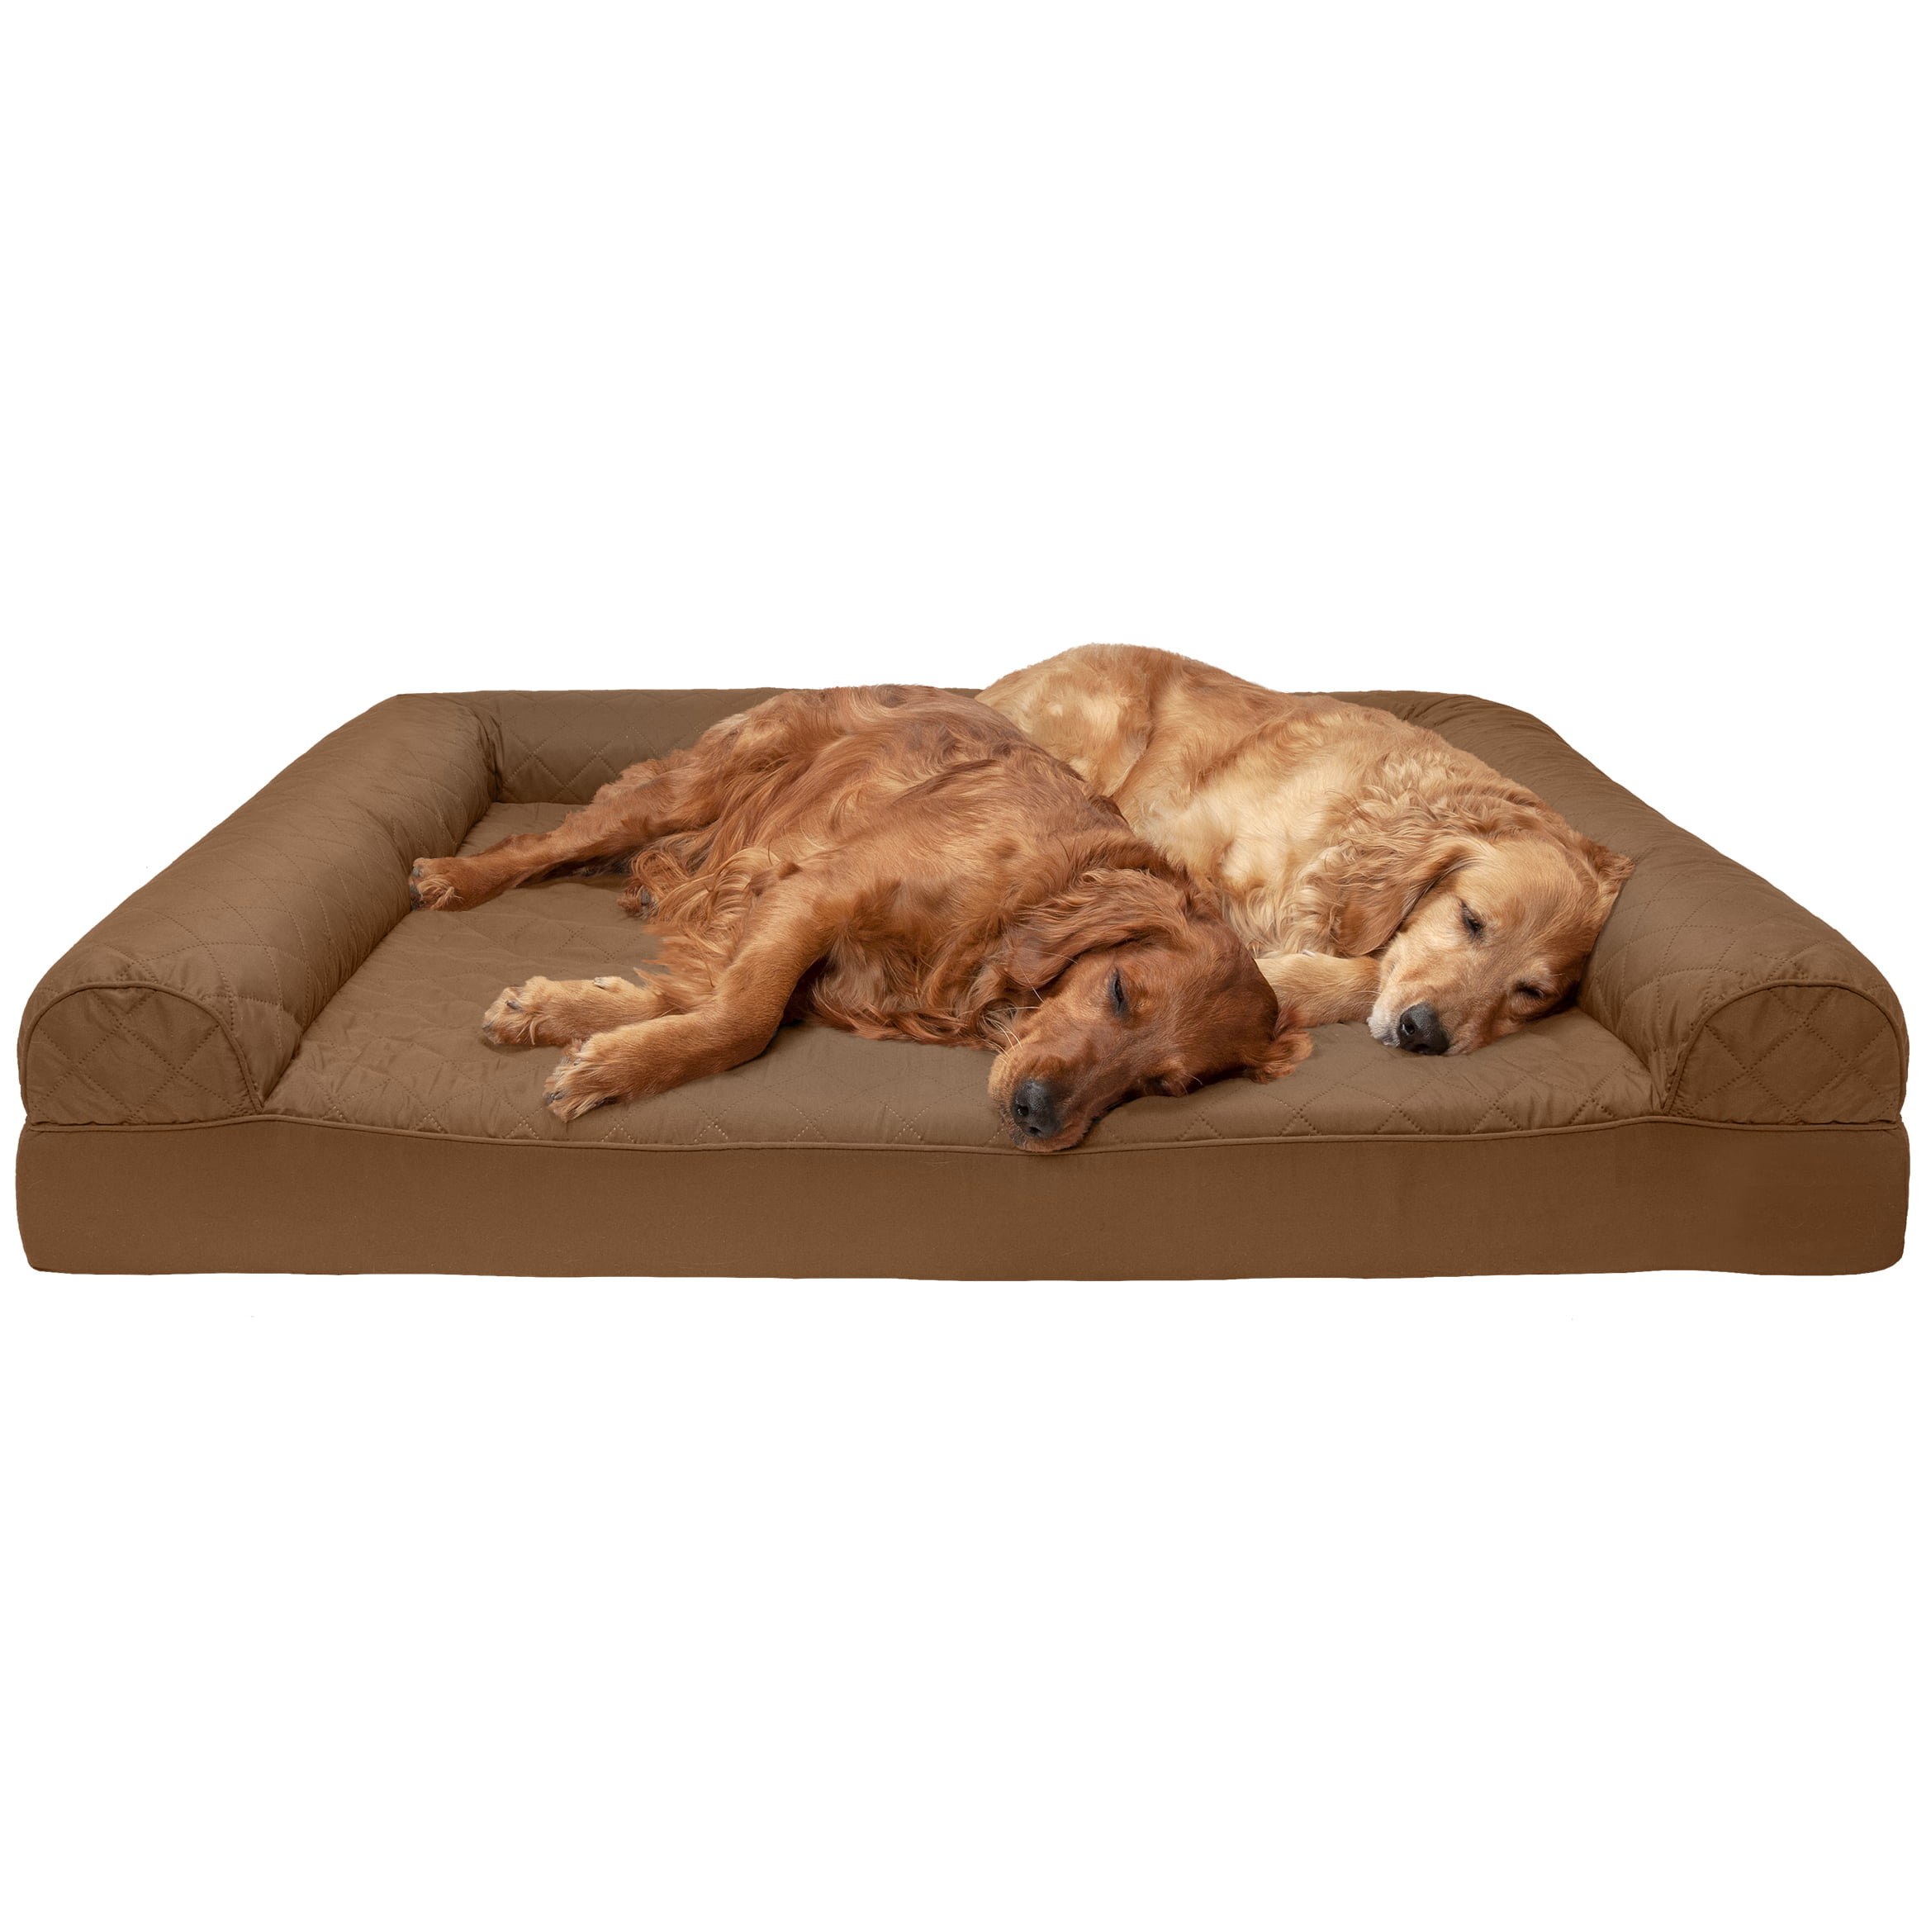 FurHaven Pet Dog Bed | Orthopedic Quilted Sofa-Style Couch ...